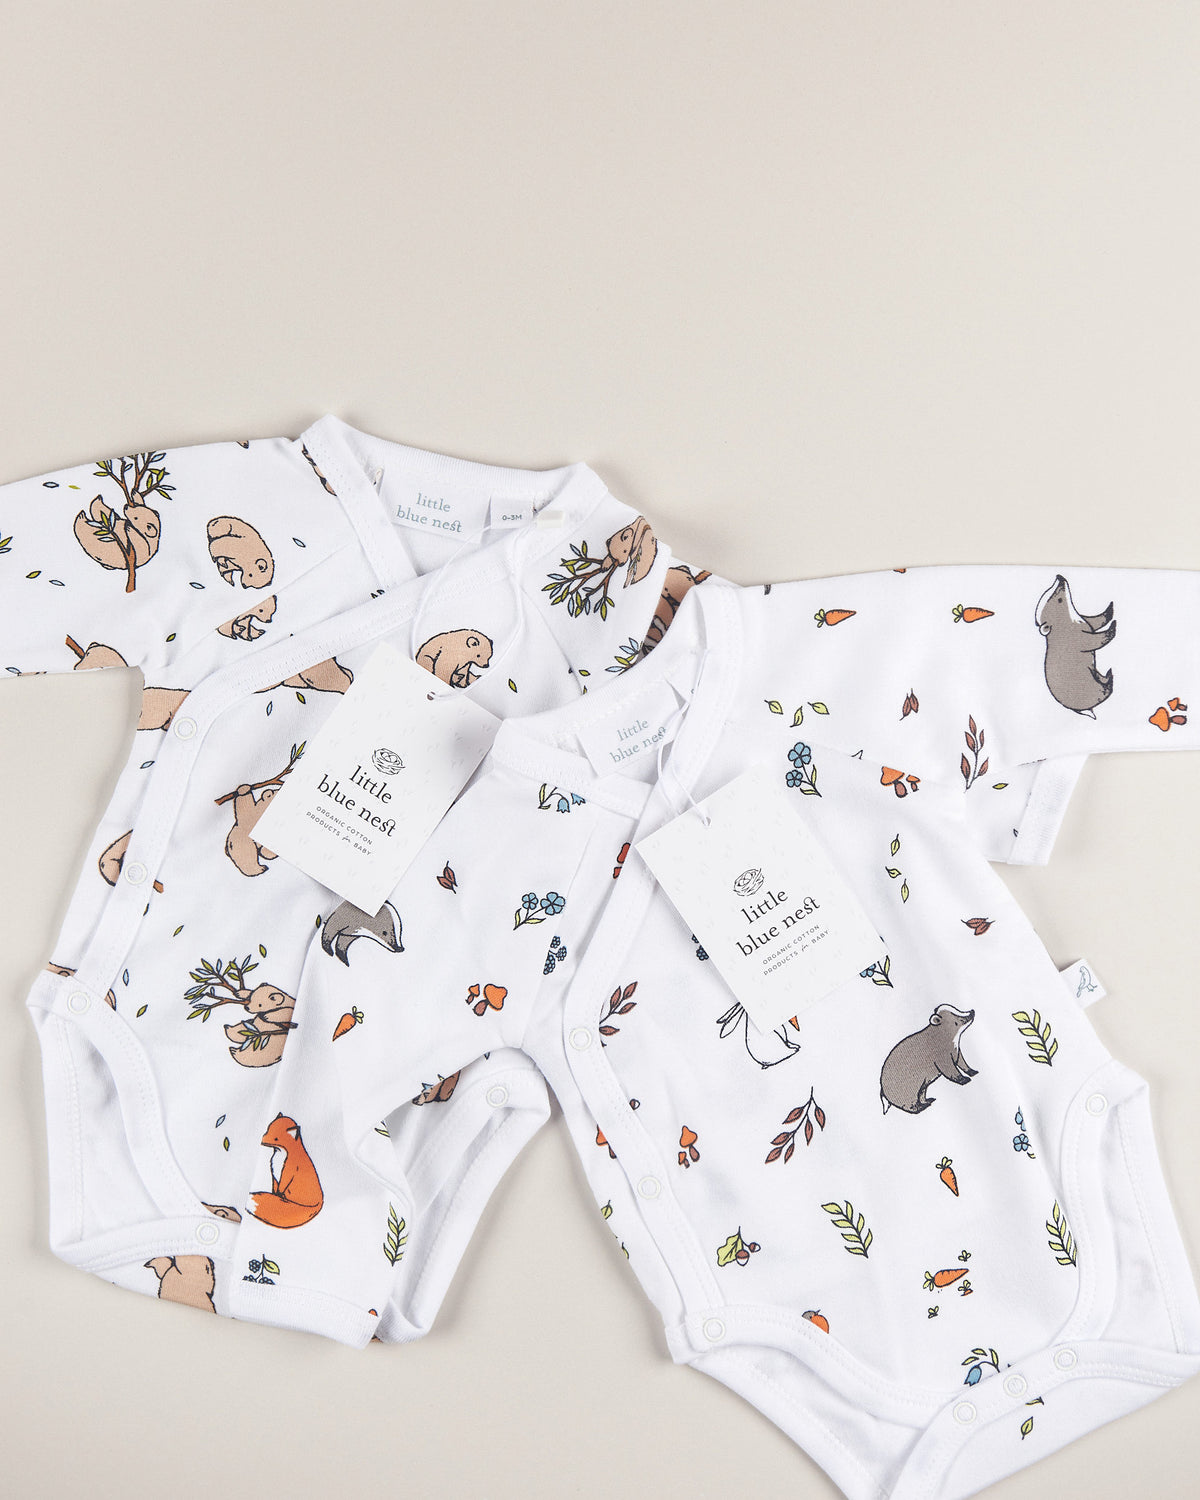 Bear and woodland Kimono baby bodysuit vests with swing tag